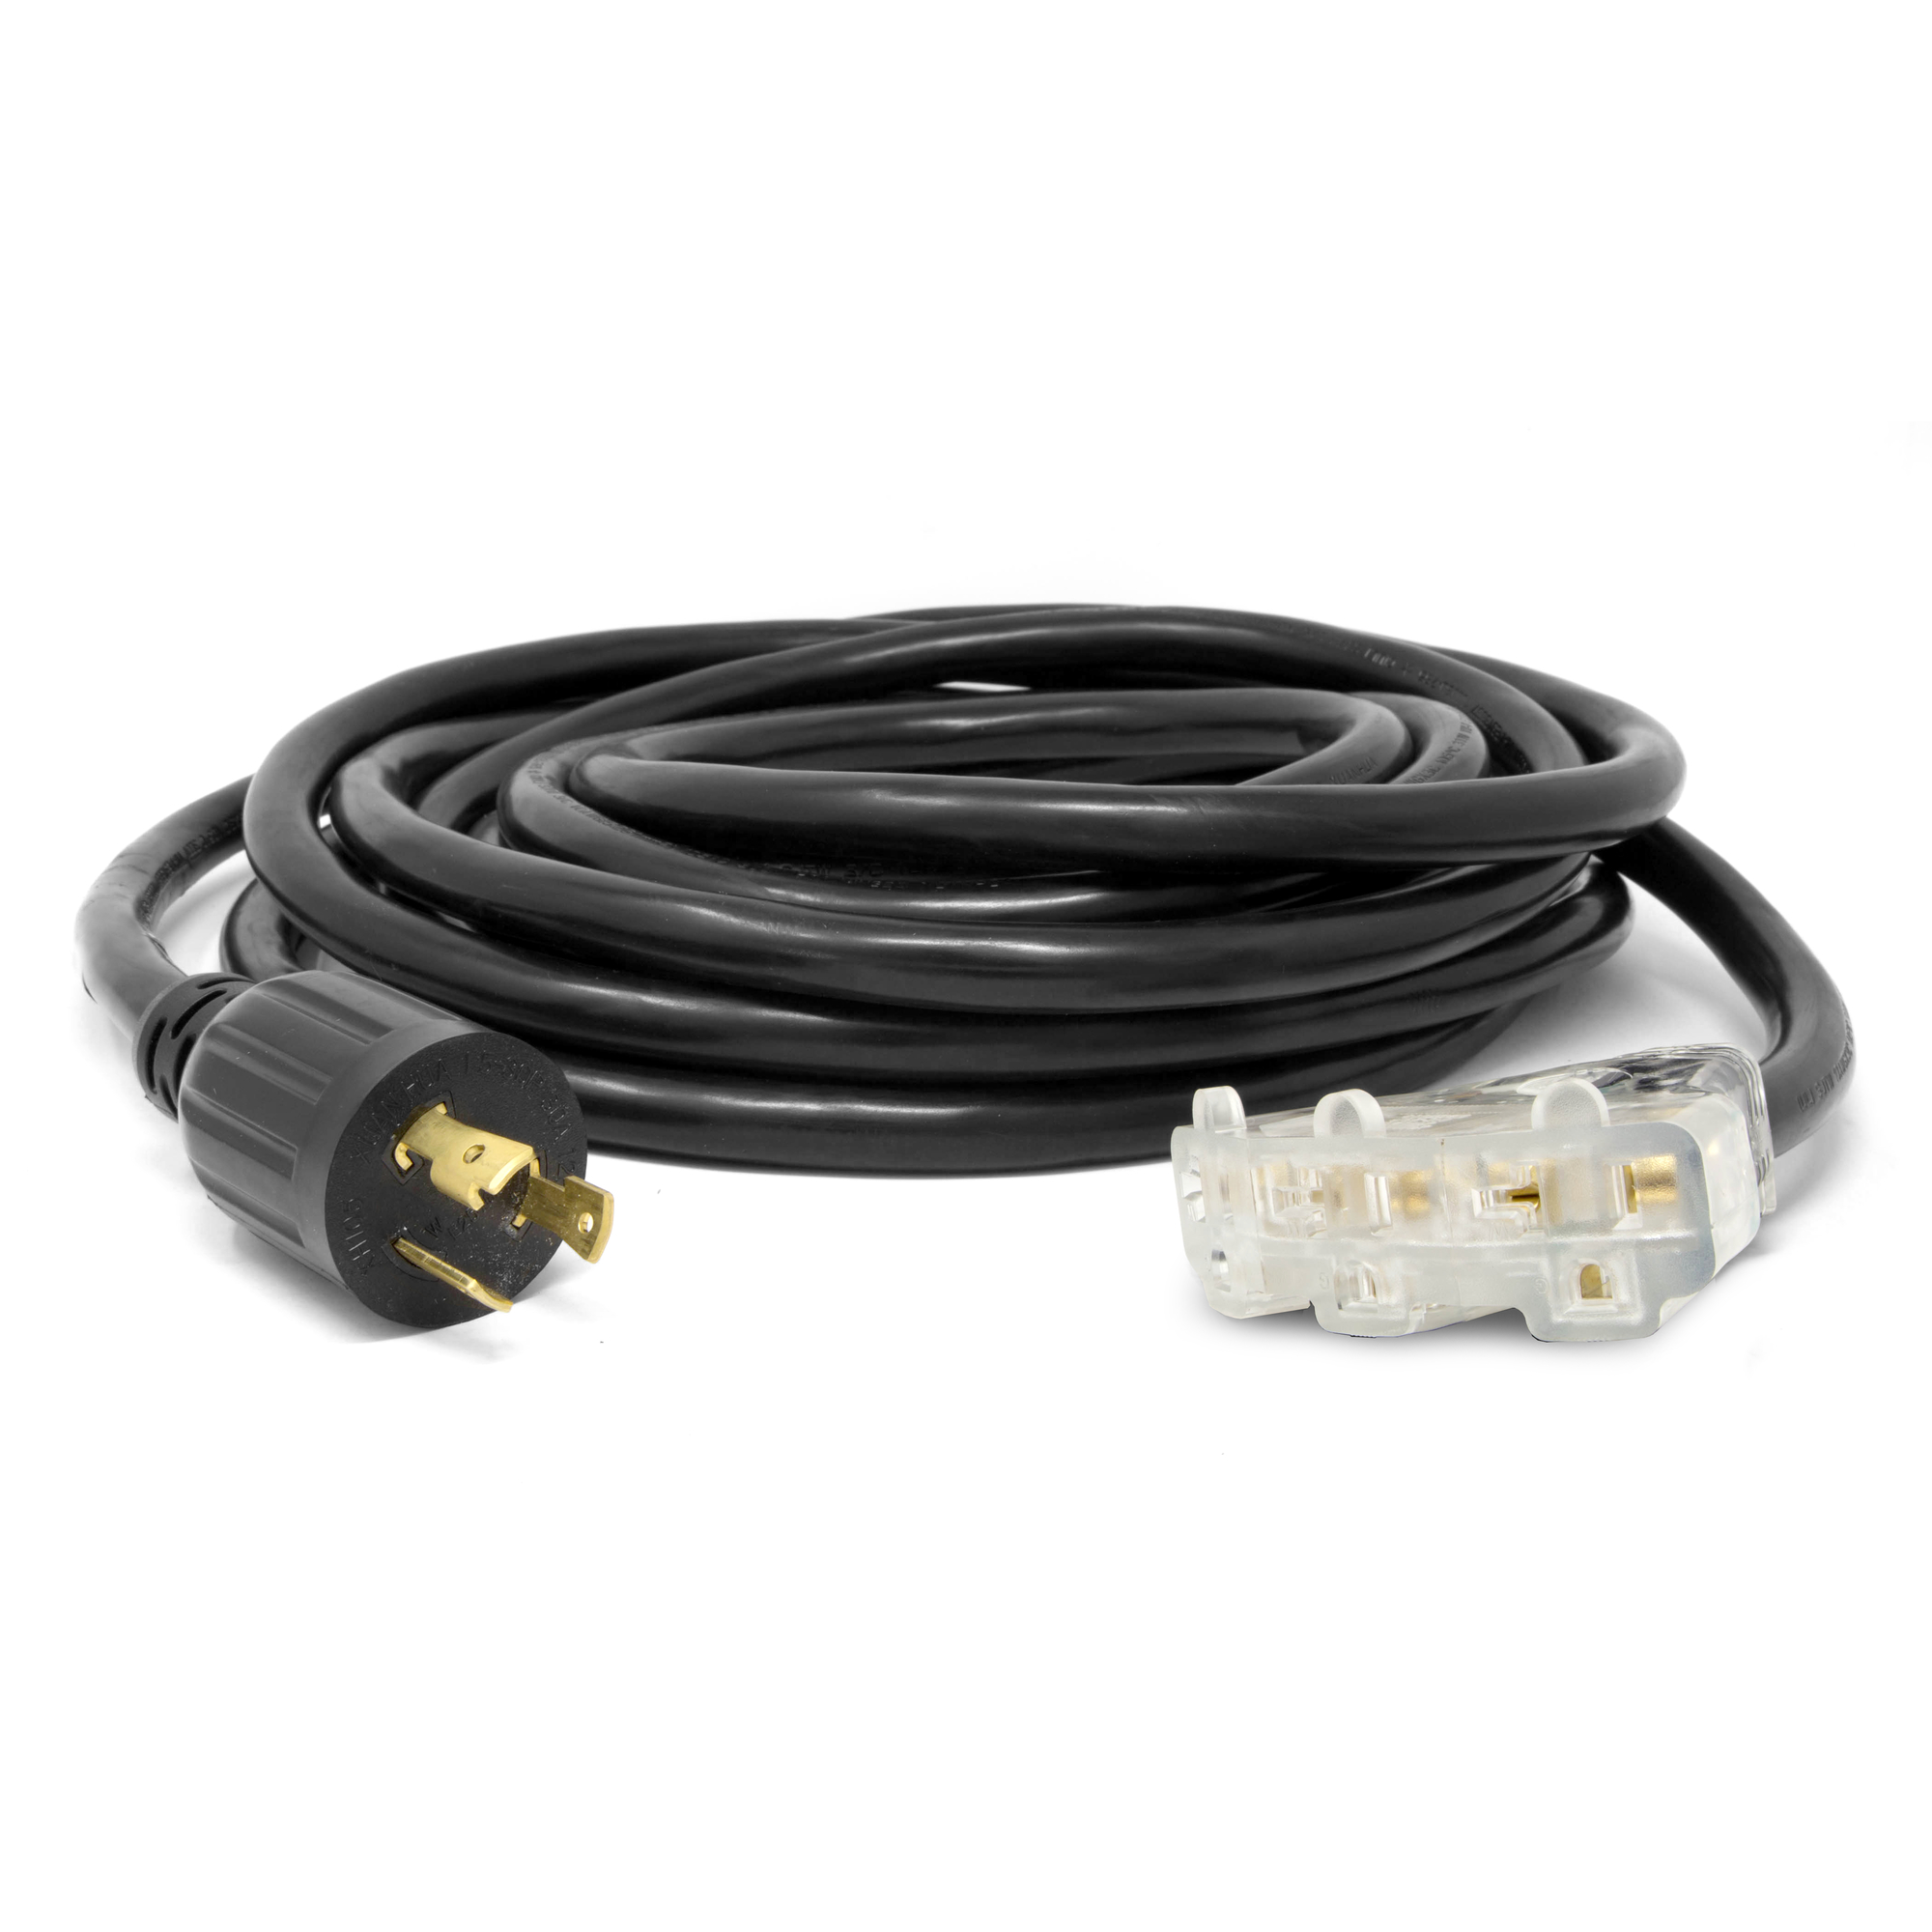 WEN, 25ft. 30-Amp SJTW 10/3 Generator Extension Cord, Amps 30 Cord Length 25 ft, Model PC2513